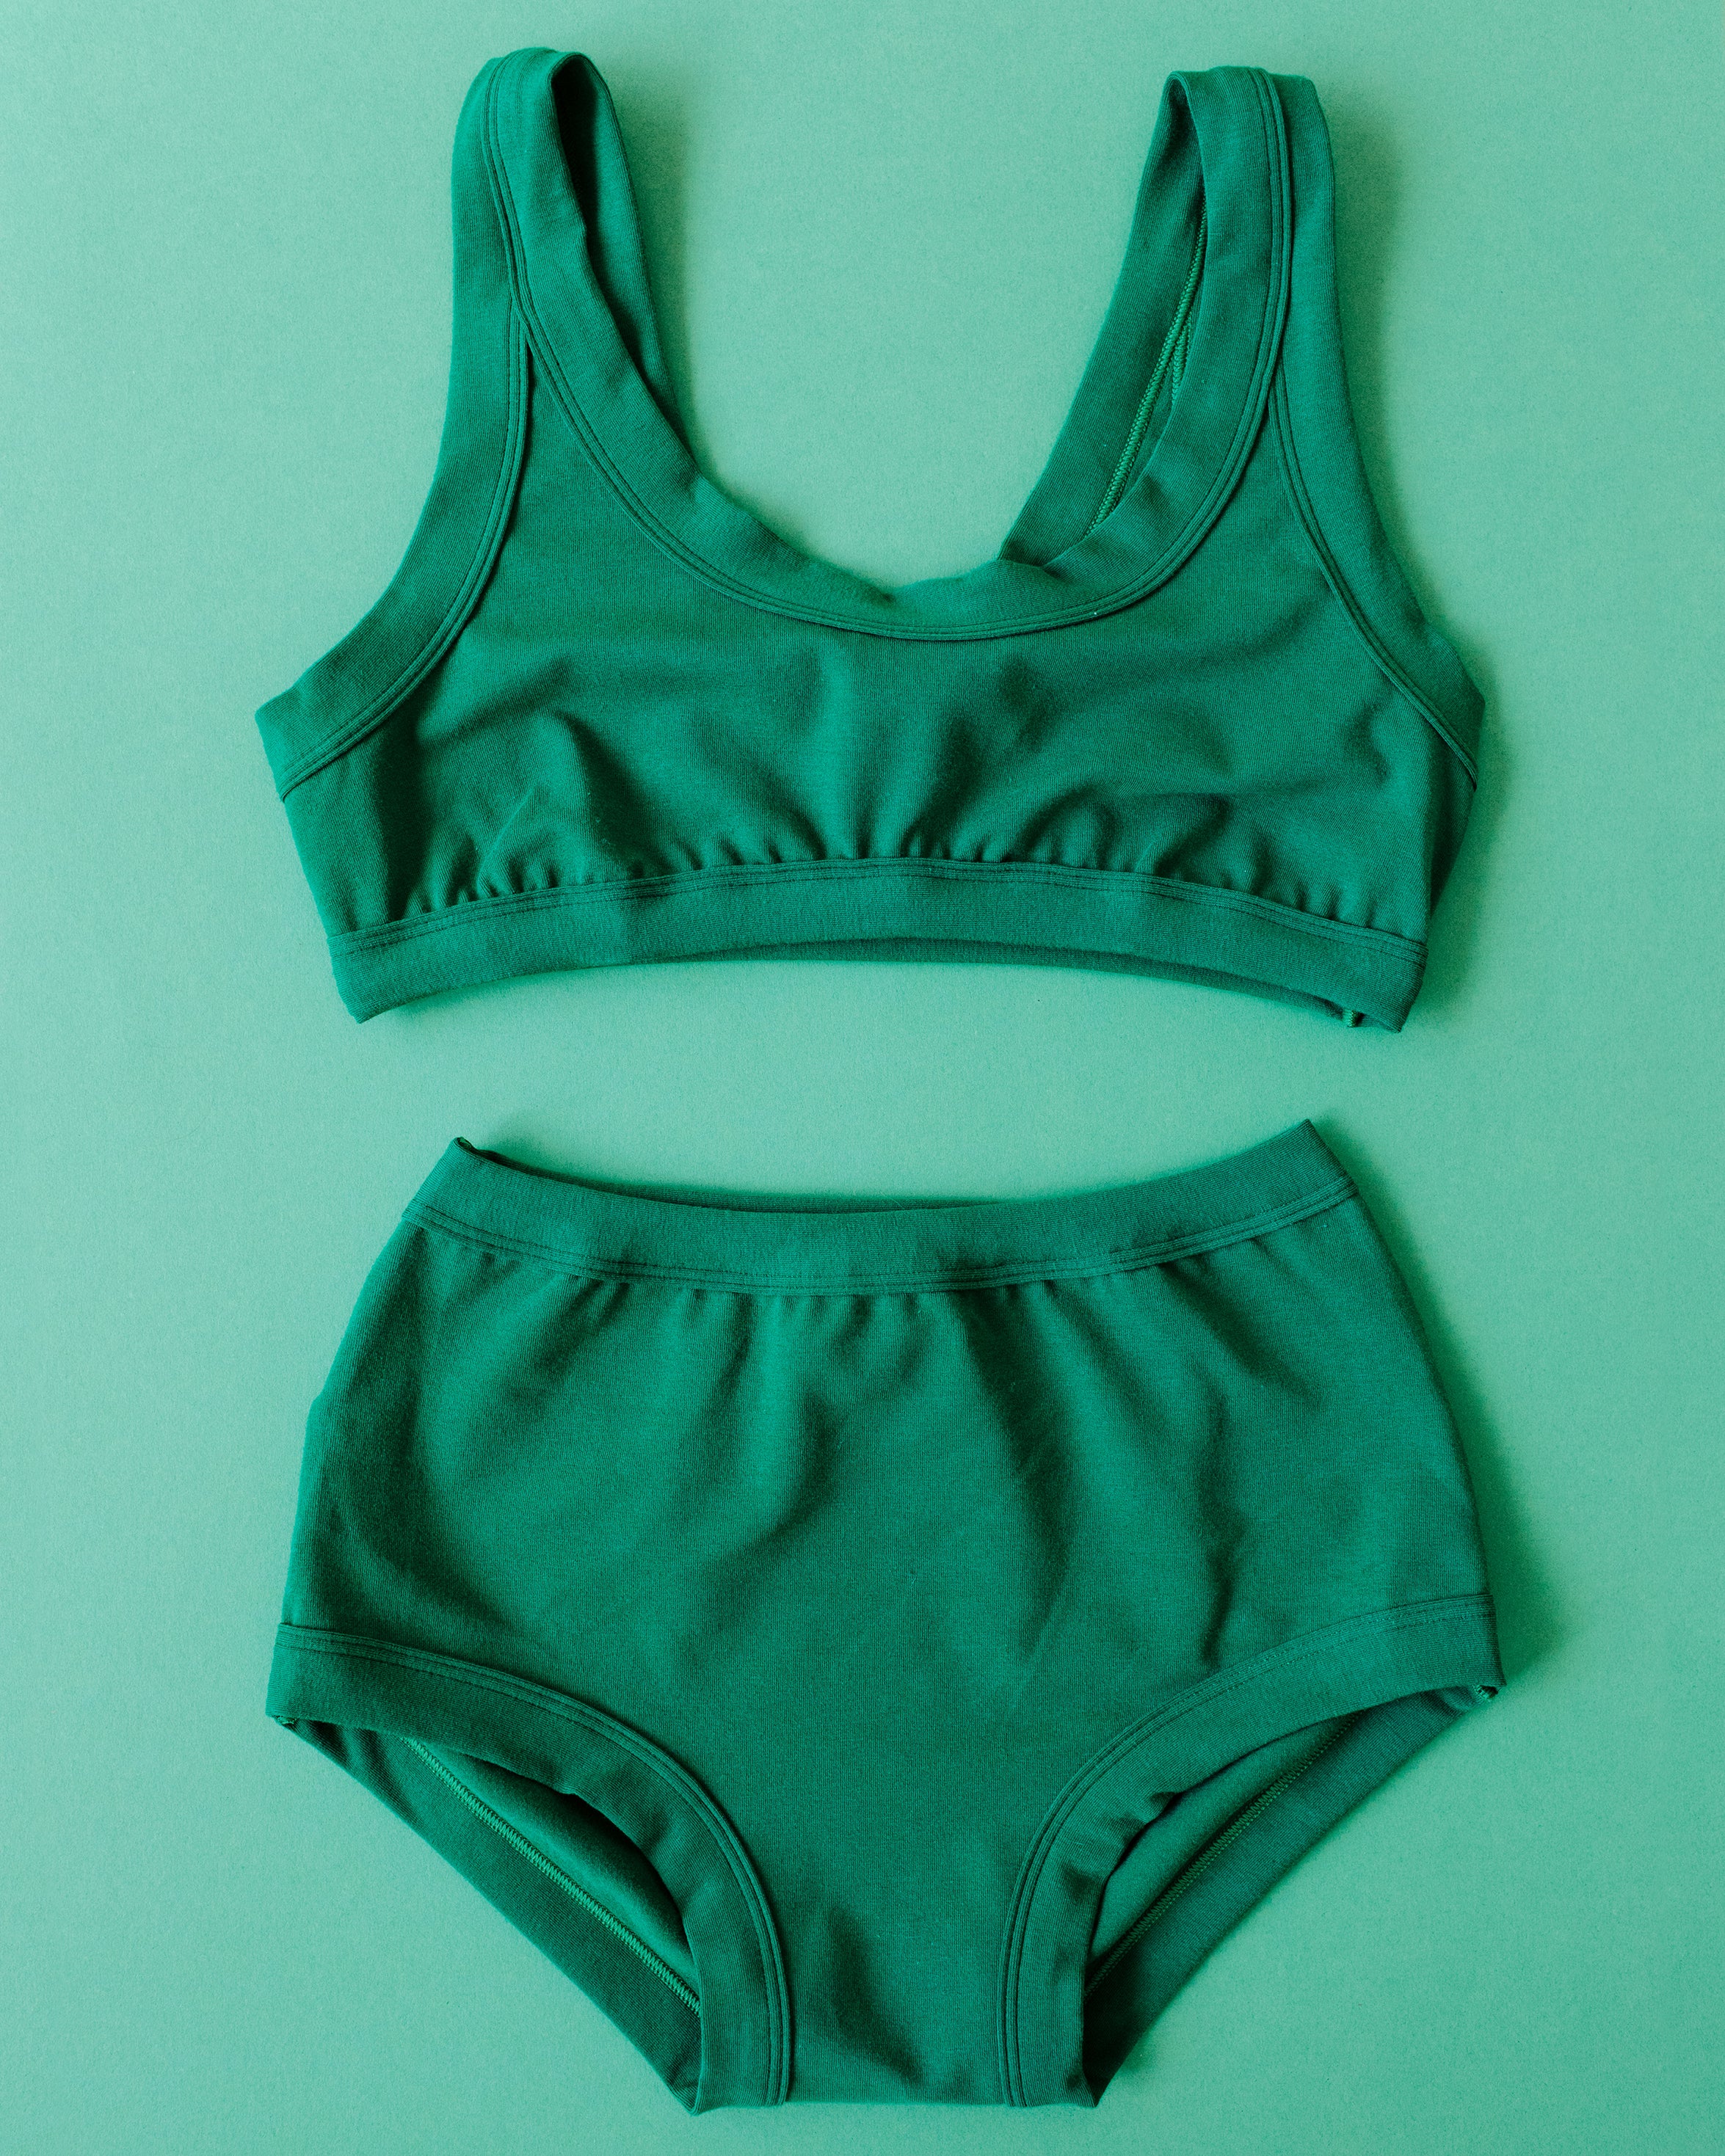 Flat lay of Thunderpants Original style underwear and Bralette set in Emerald Green.